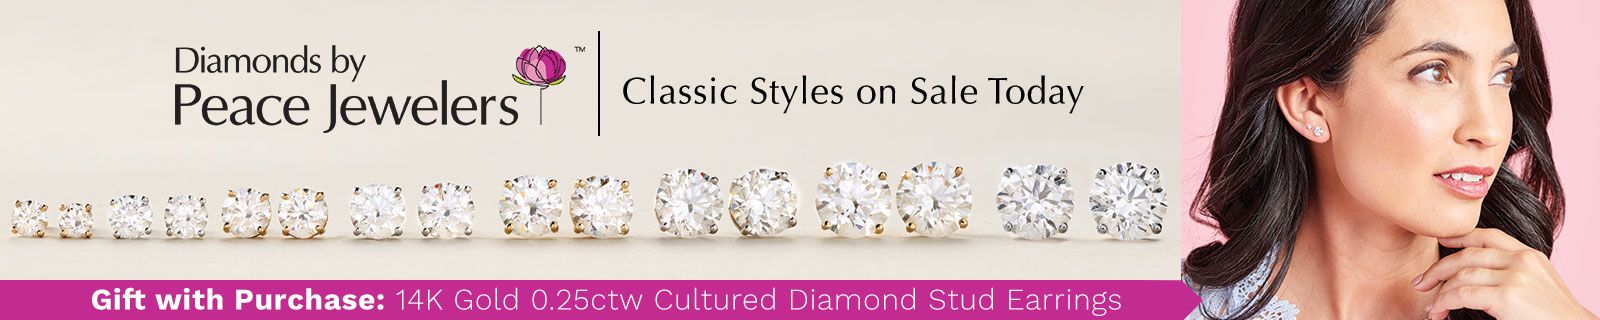 Diamonds by Peace Jewelers - Classic Styles on Sale Today + Gift with Purchase: 14K Gold 0.25ctw Cultured Diamond Stud Earrings